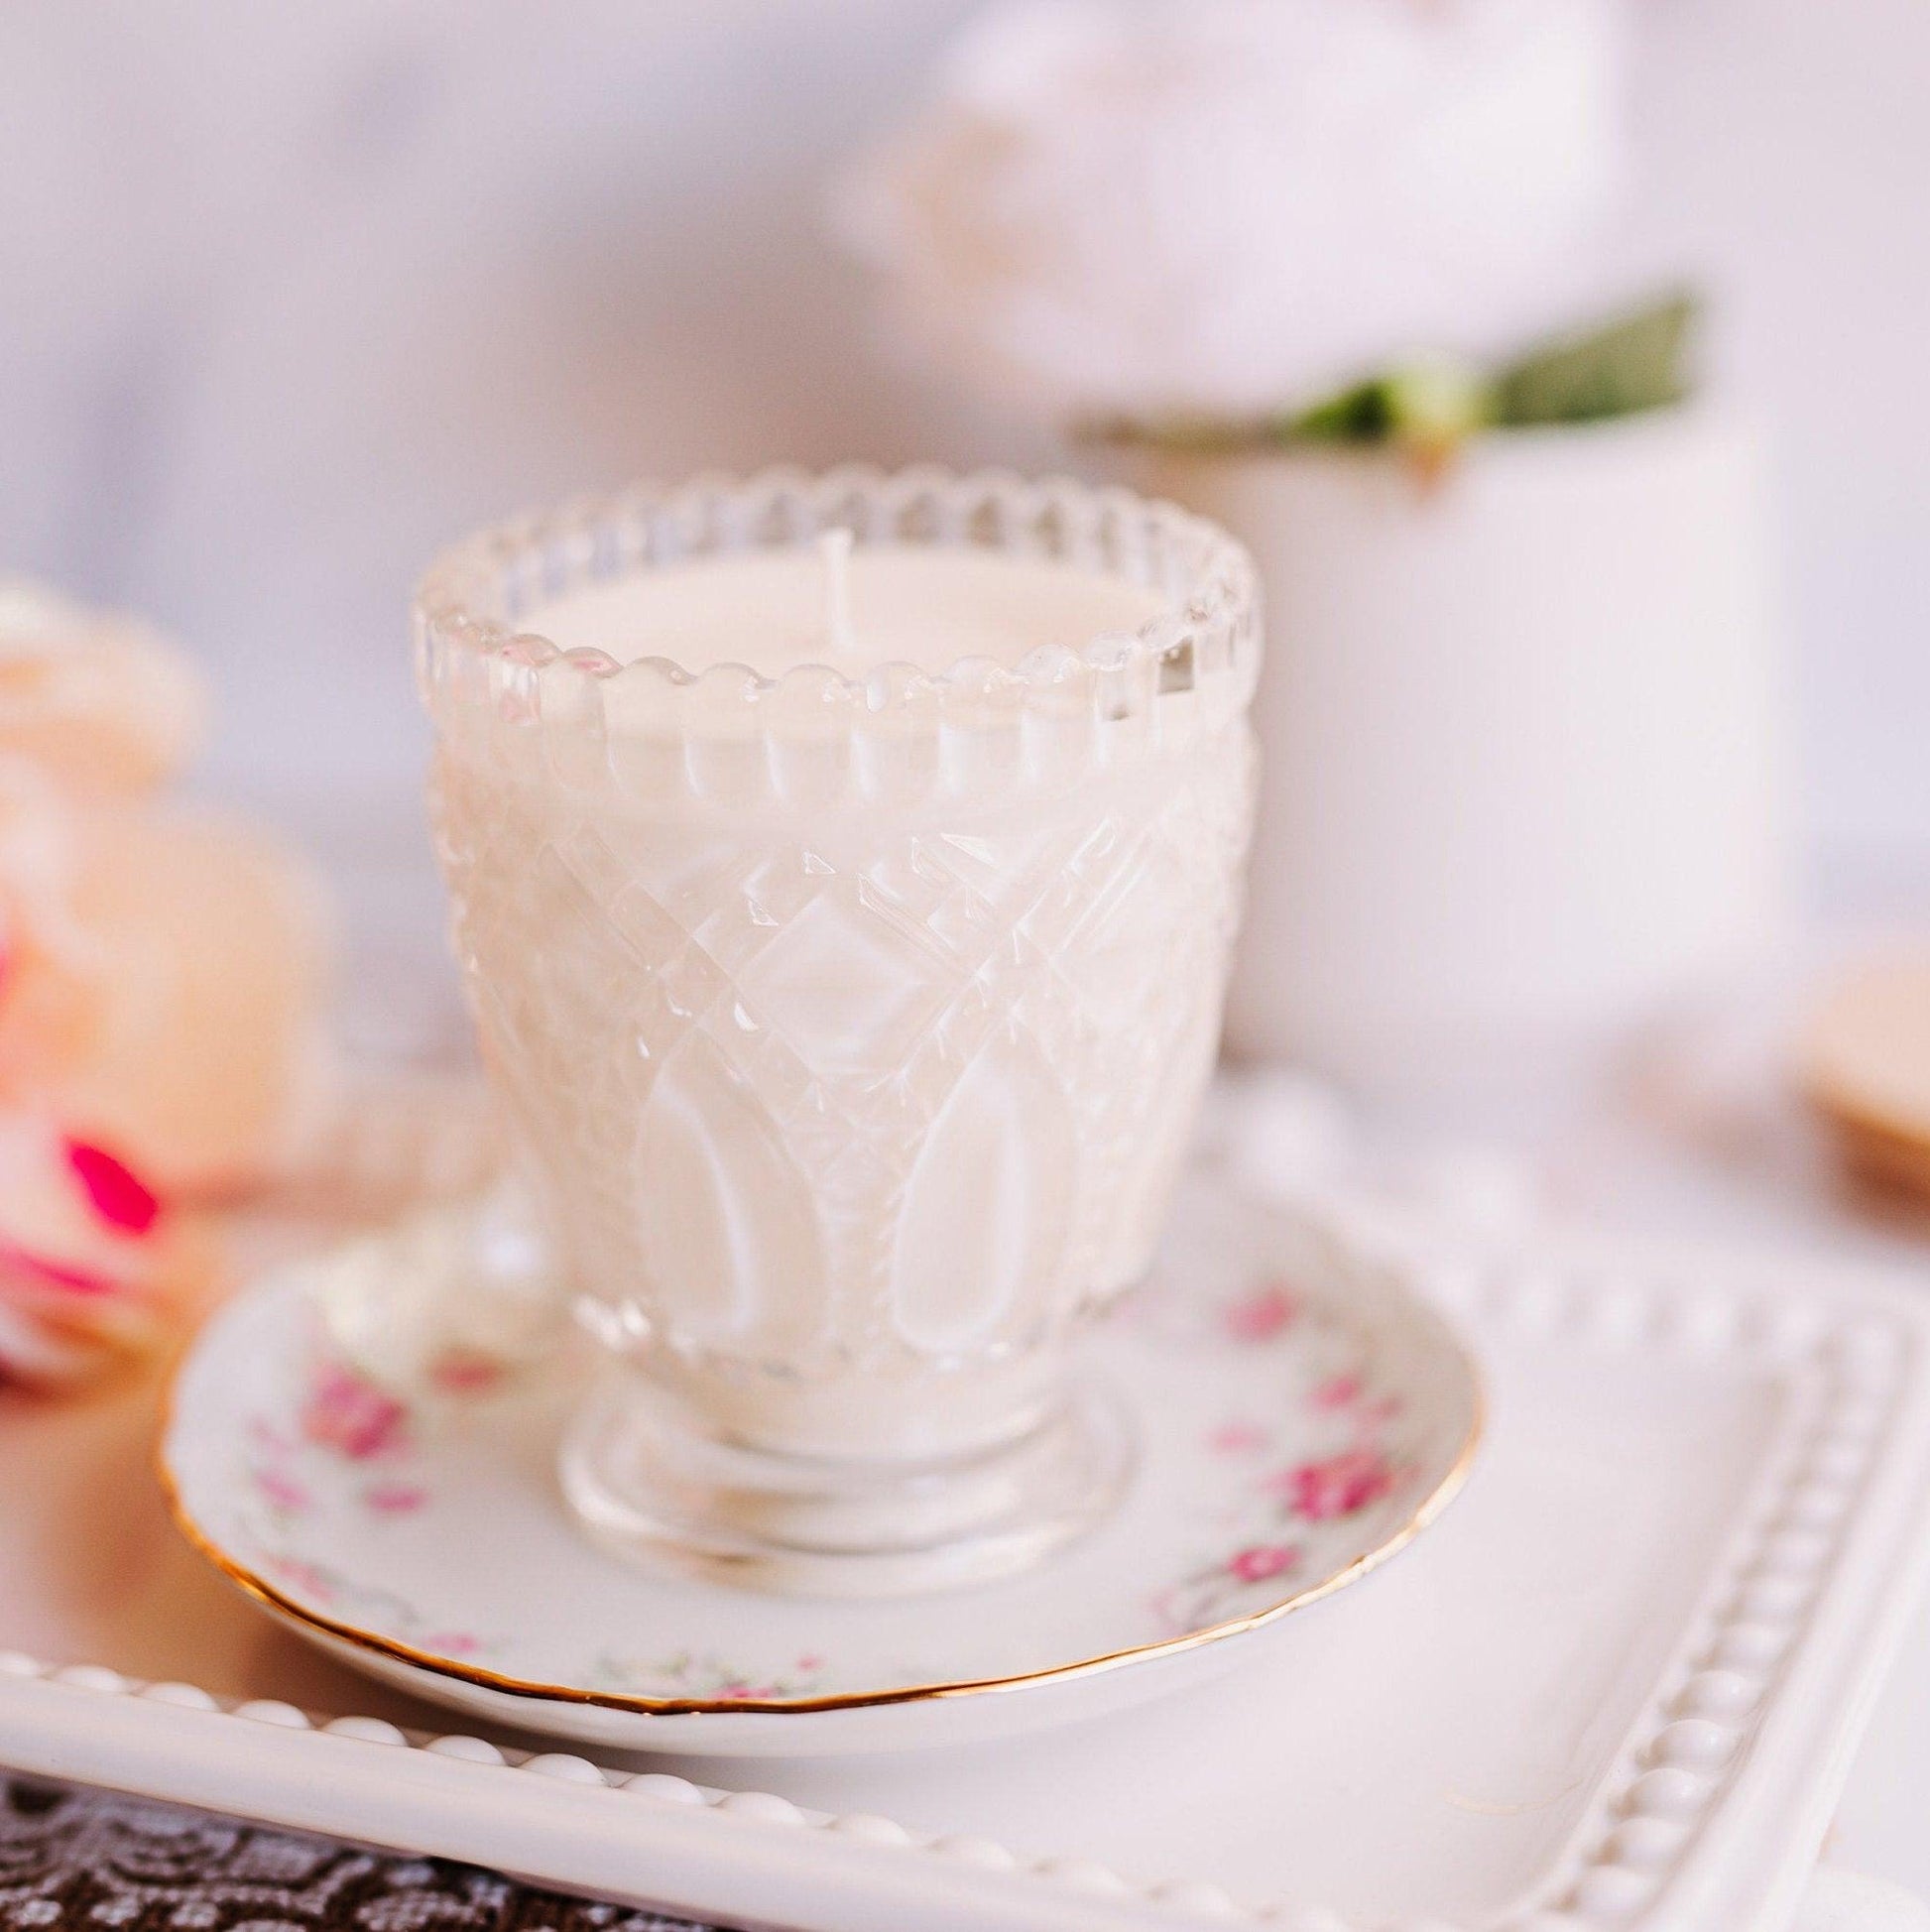 Soy Candle in Vintage Style Glass Votives - RetroWix 